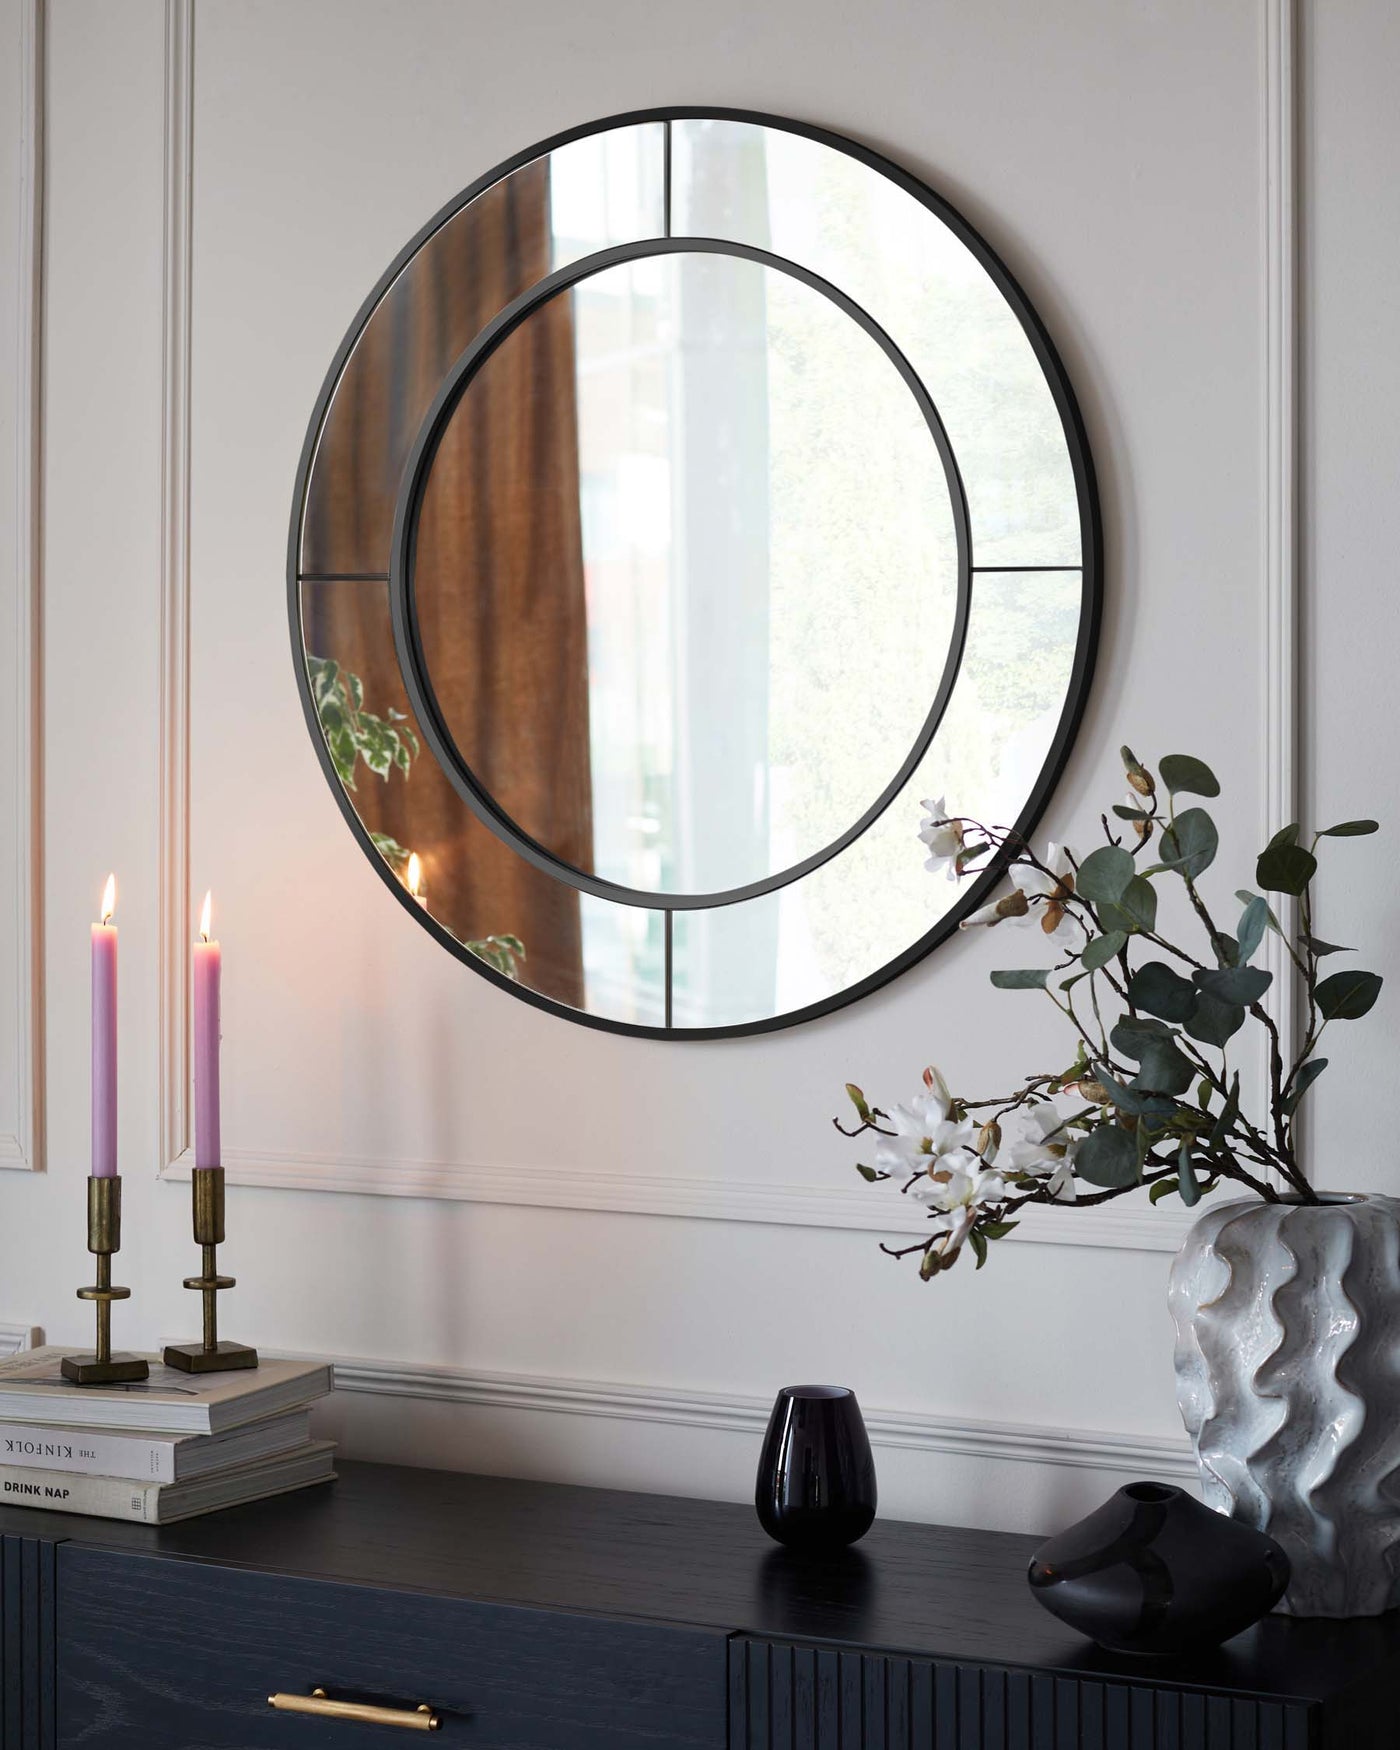 A contemporary dark wood sideboard with a textured front, featuring a large round mirror with a thin black frame hung above it. The sideboard is adorned with decorative elements including a sculptural vase with eucalyptus branches, two pink tapered candles in brass holders, books, and two smaller artistic vases.